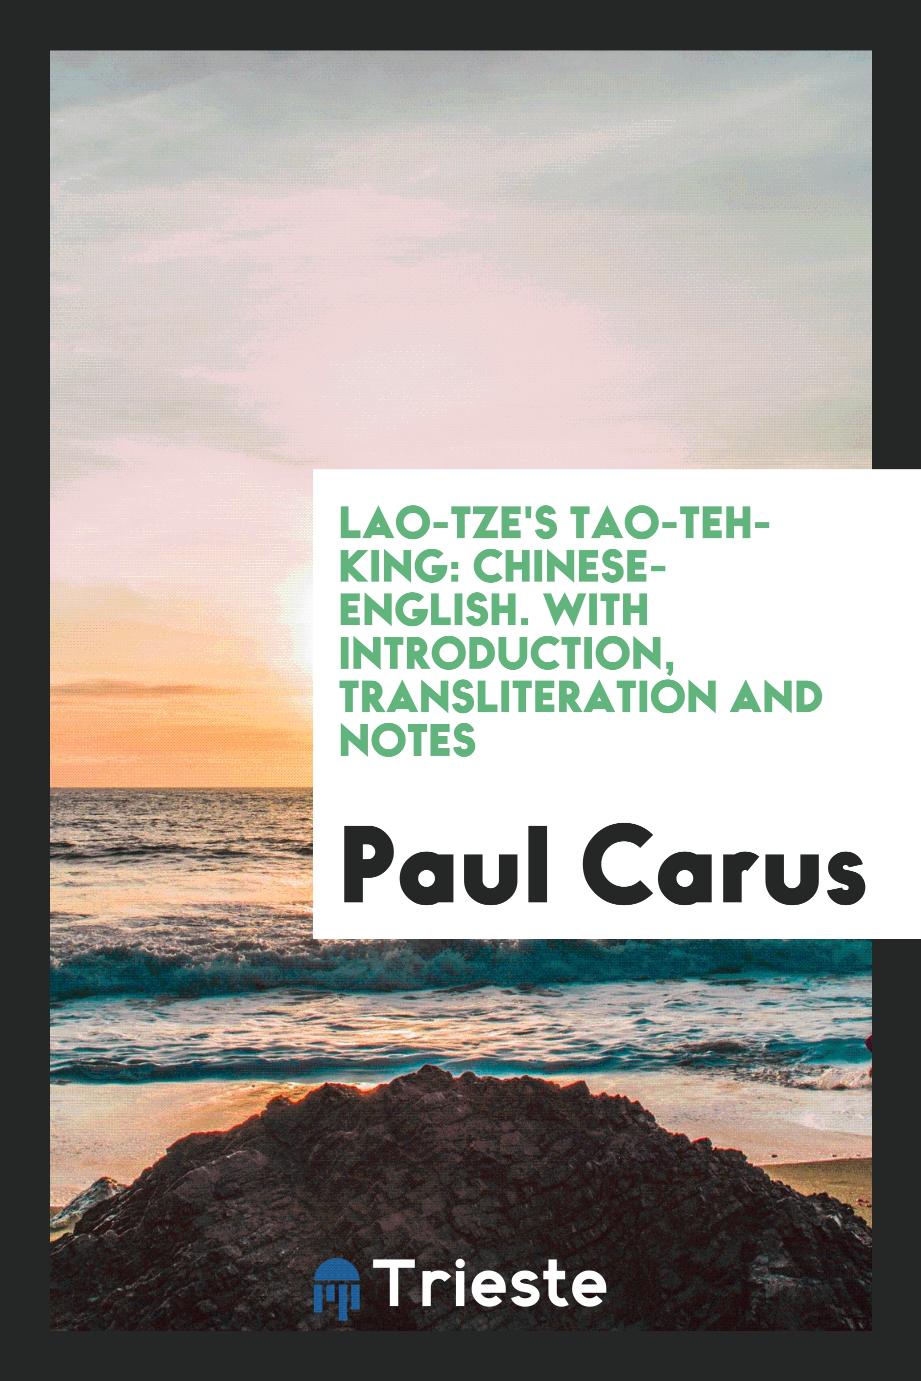 Lao-Tze's Tao-Teh-King: Chinese-English. With Introduction, Transliteration and Notes